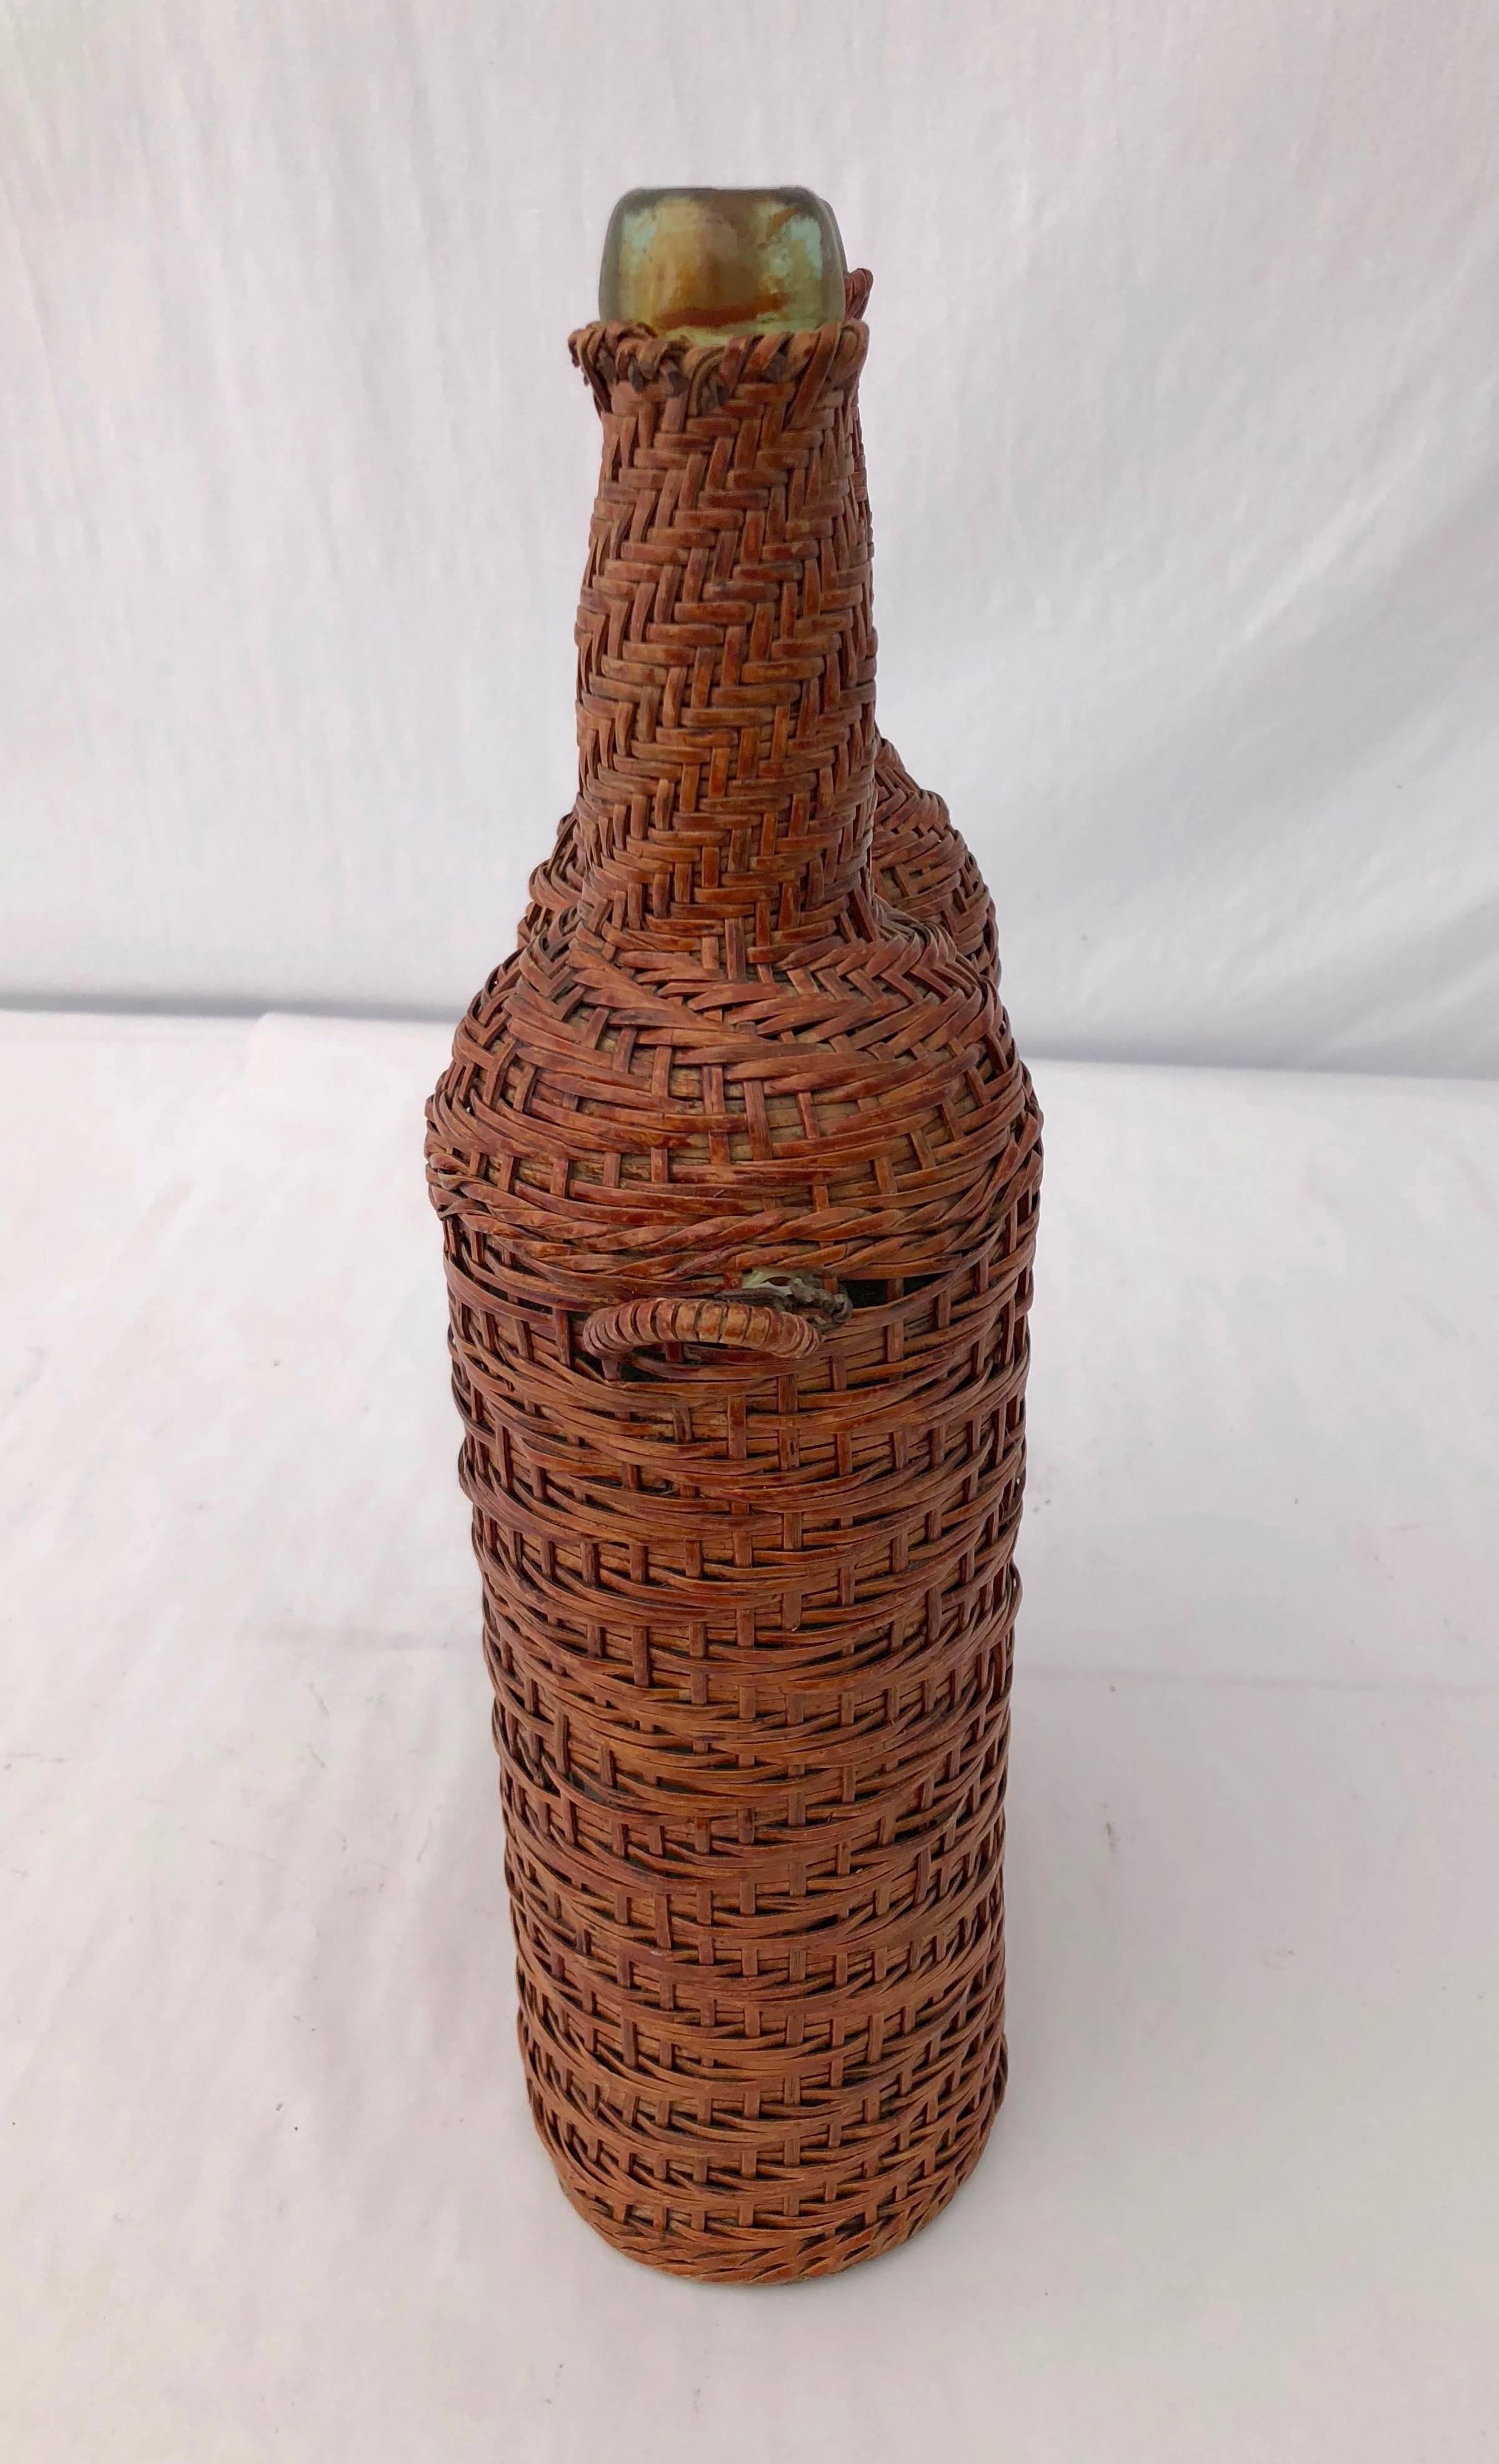 This is a great pair of French hand blown bottles in a greenish color glass covered by a light brown woven wicker. It comes with a detached handle. This would be great as an original vase for fresh cut lowers or as a decorative piece.